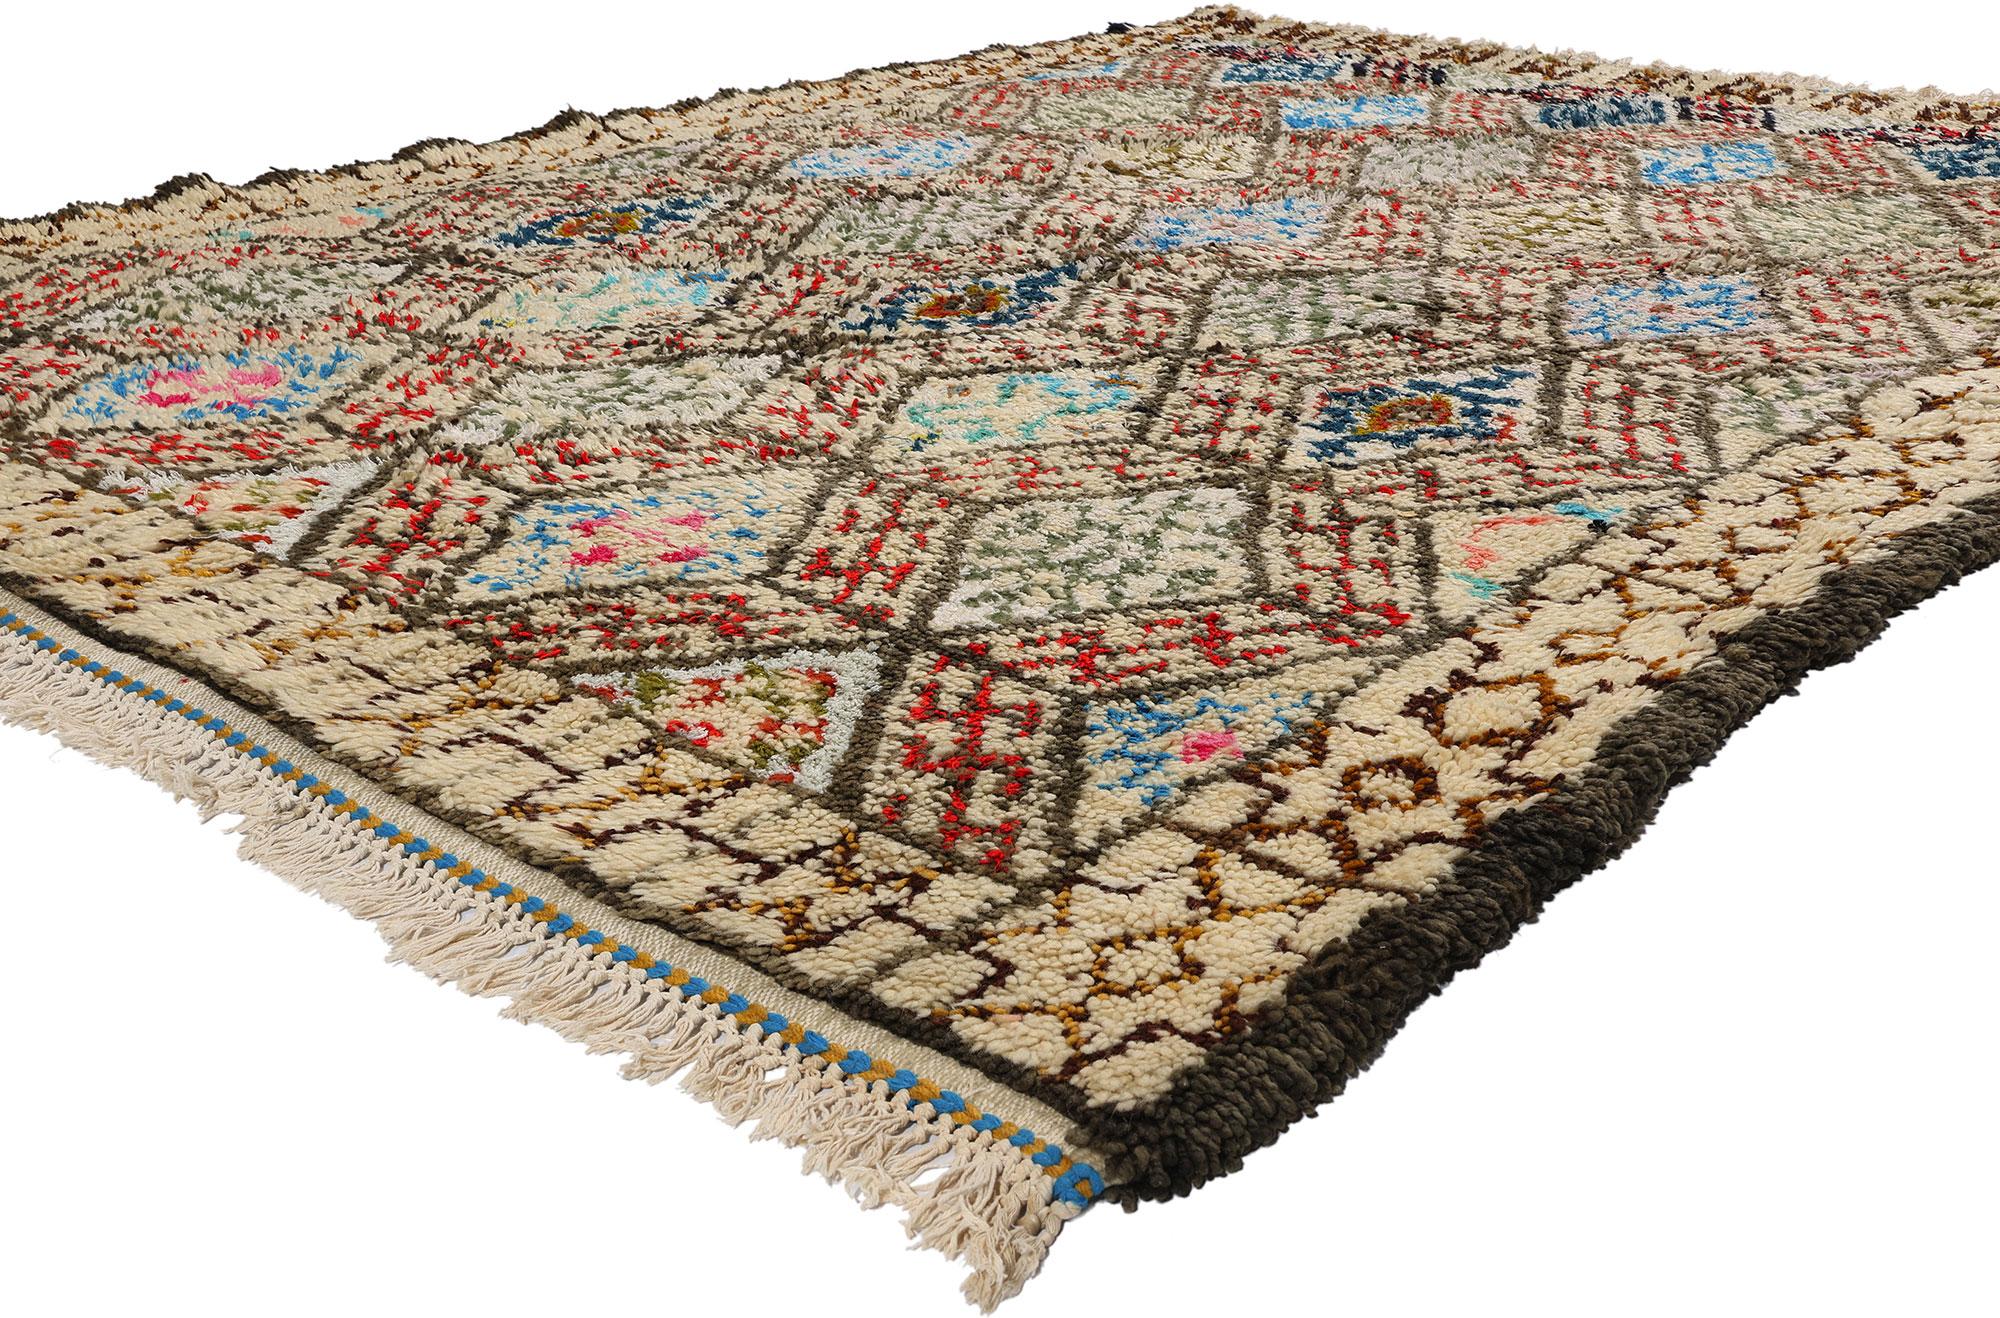 21775 Vintage Moroccan Beni Ourain Rug, 06'01 x 08'06. Emerging from the esteemed Beni Ourain tribe in Morocco, these intricately crafted rugs pay homage to tradition with steadfast attention to detail, employing untreated sheep's wool to imbue